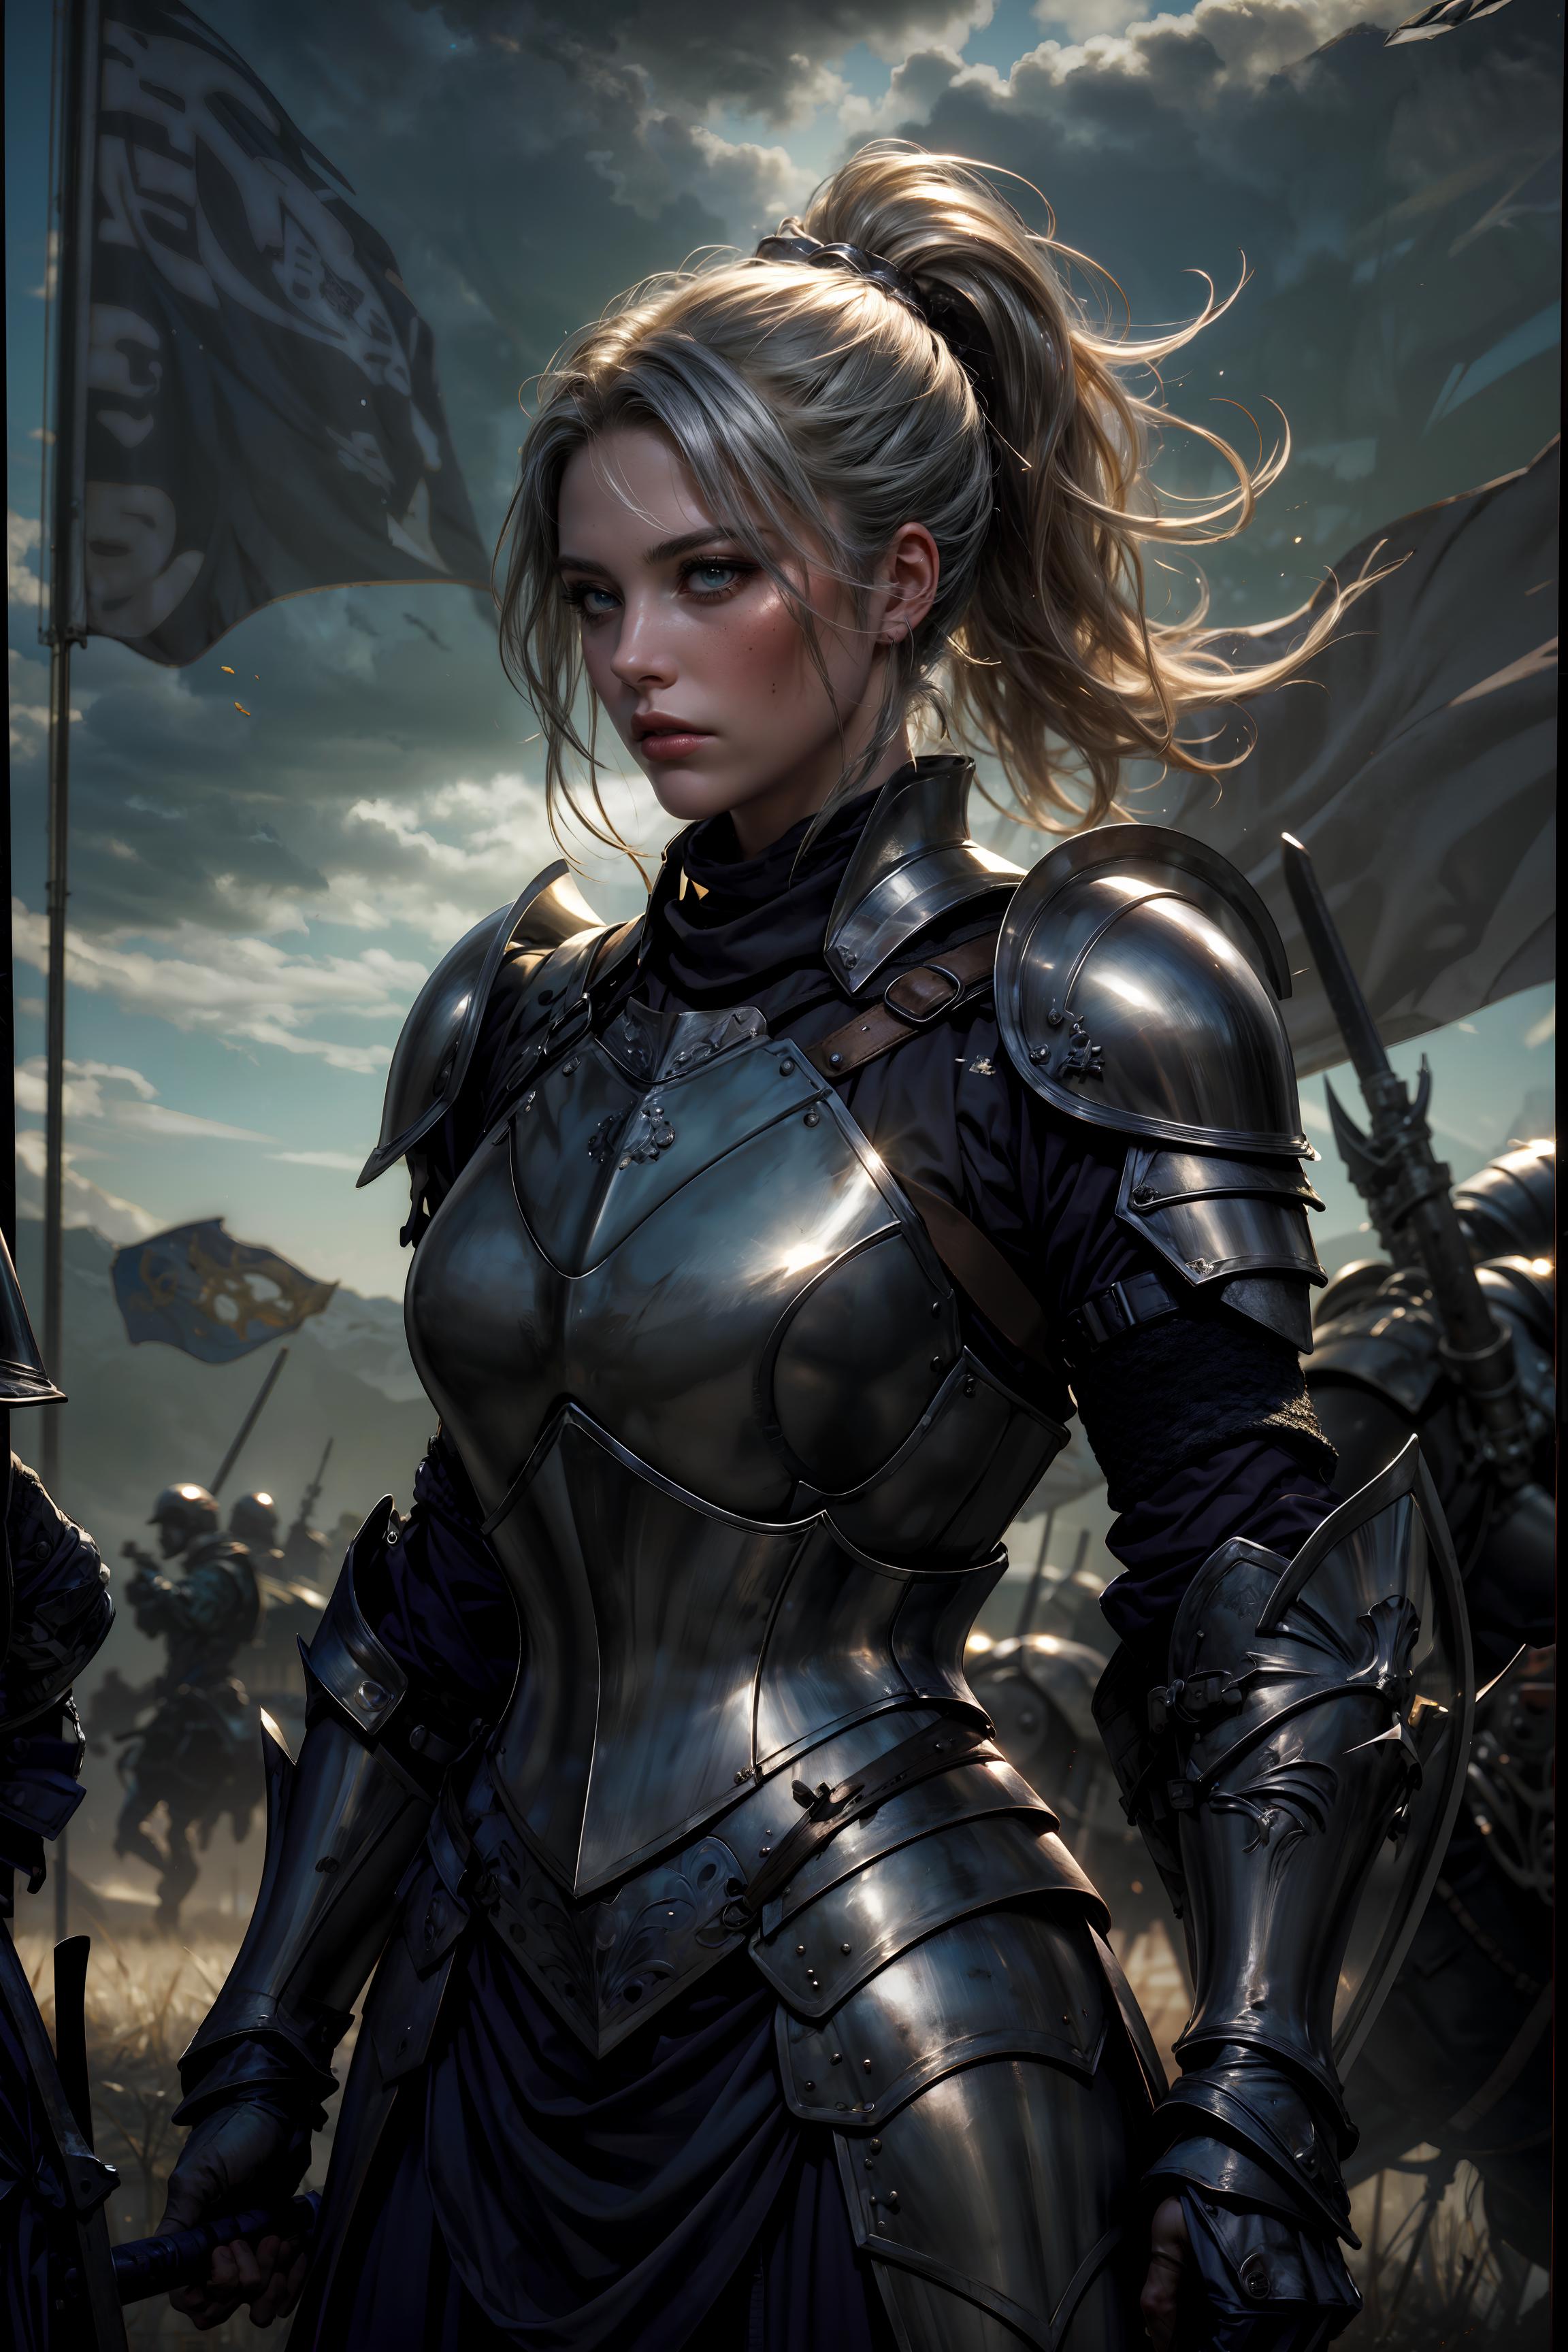 A woman in a medieval armor and helmet.